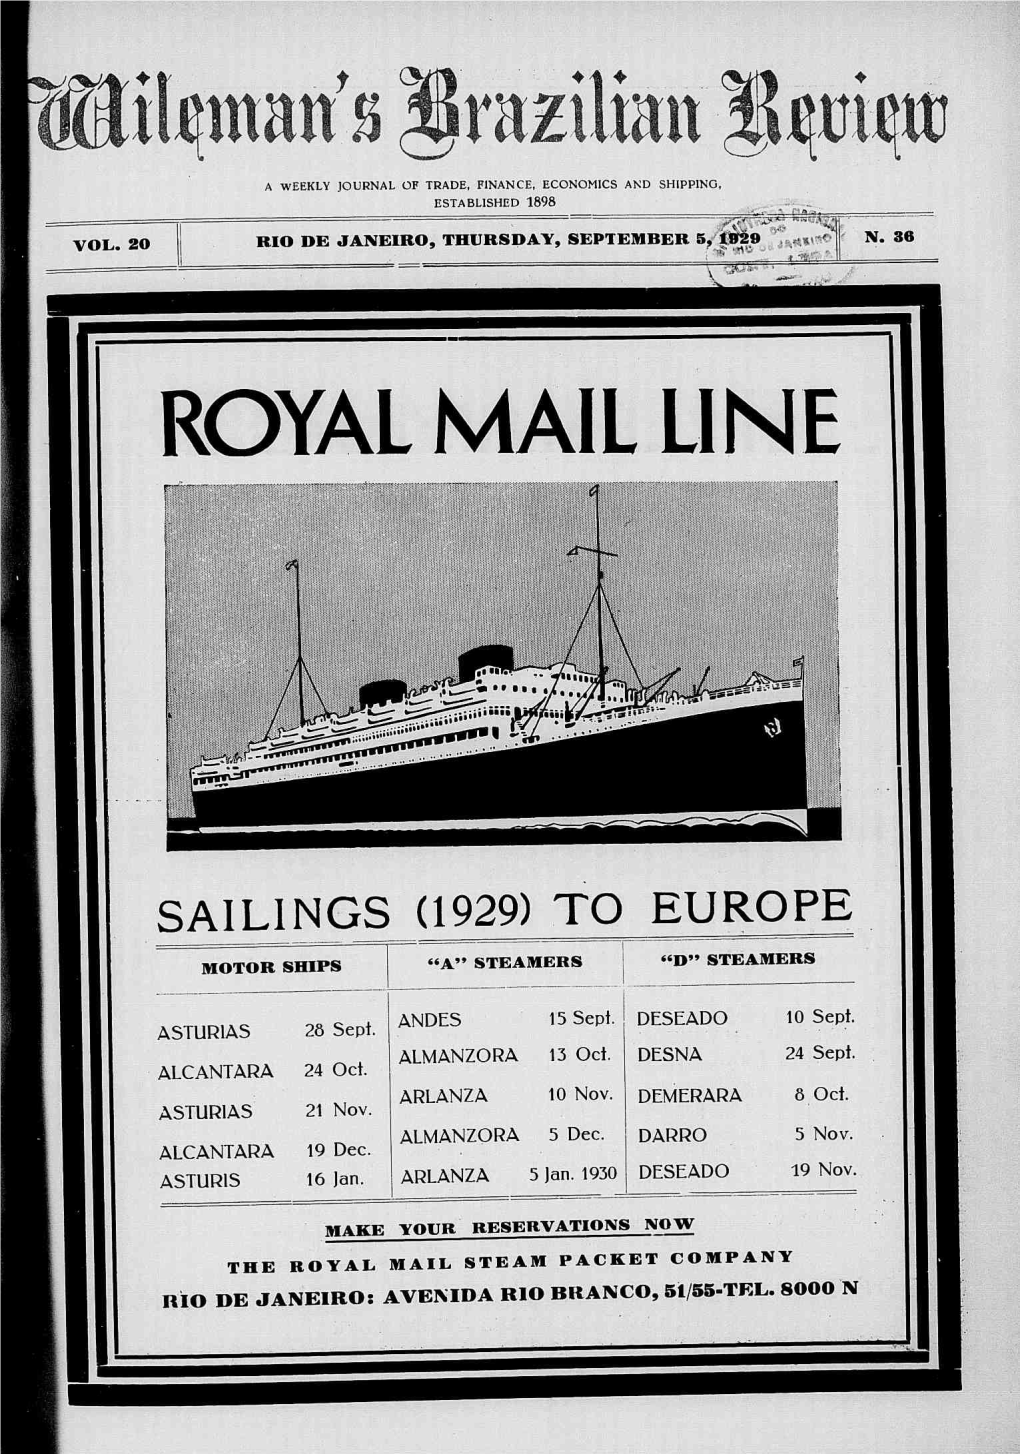 Sailings (1929) to Europe "A" "D" Motor Ships Steamers Steamers